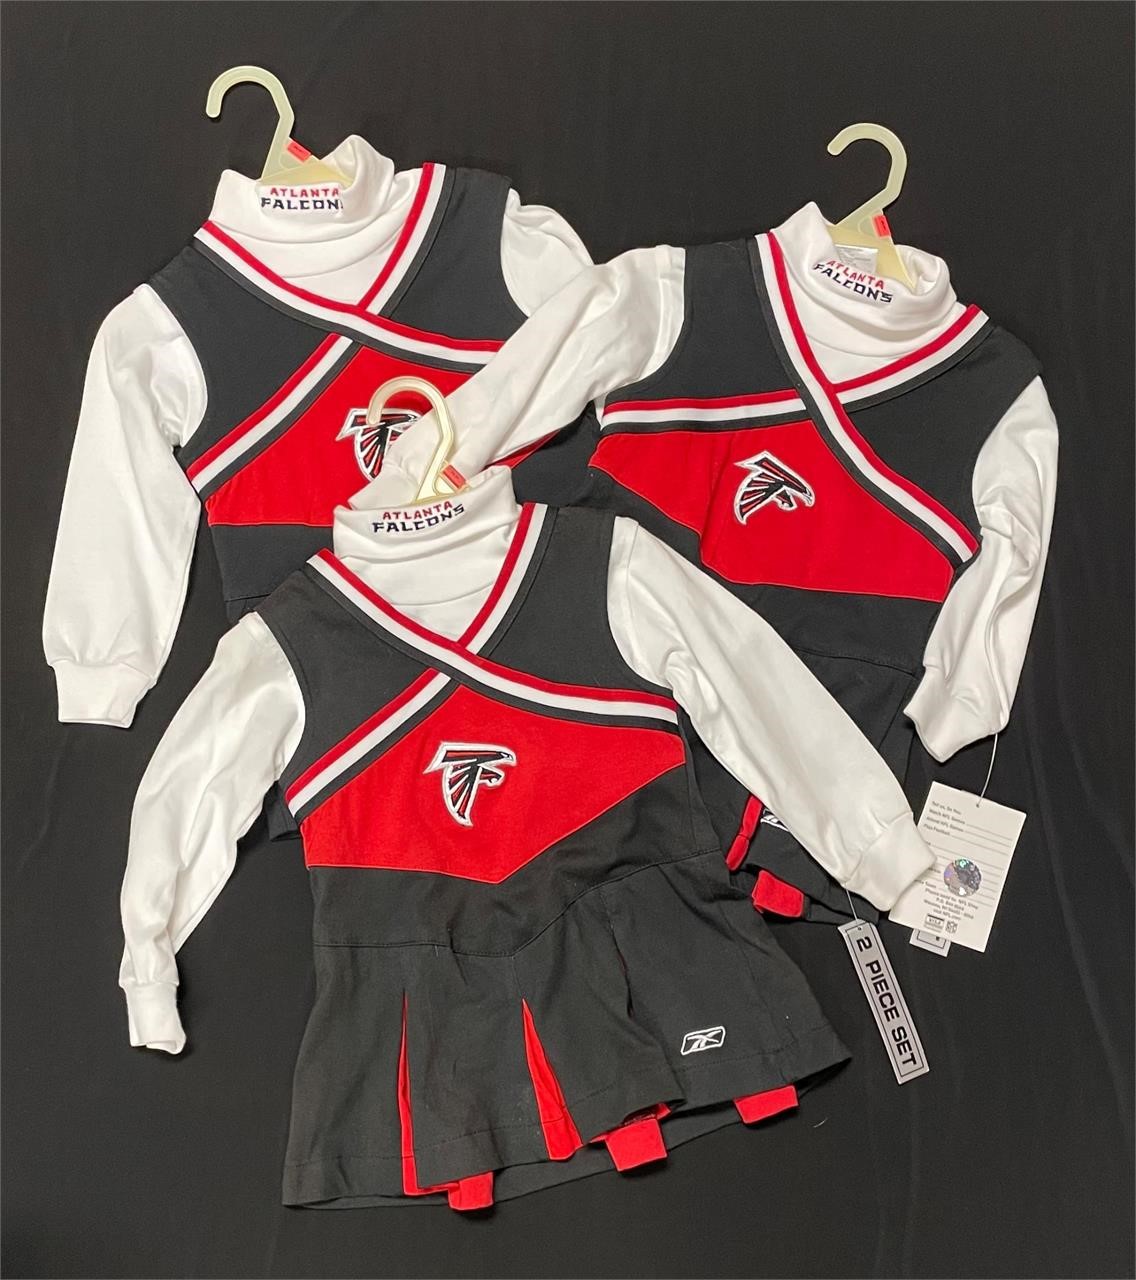 3 Falcons Childs Cheerleading Dresses NWT